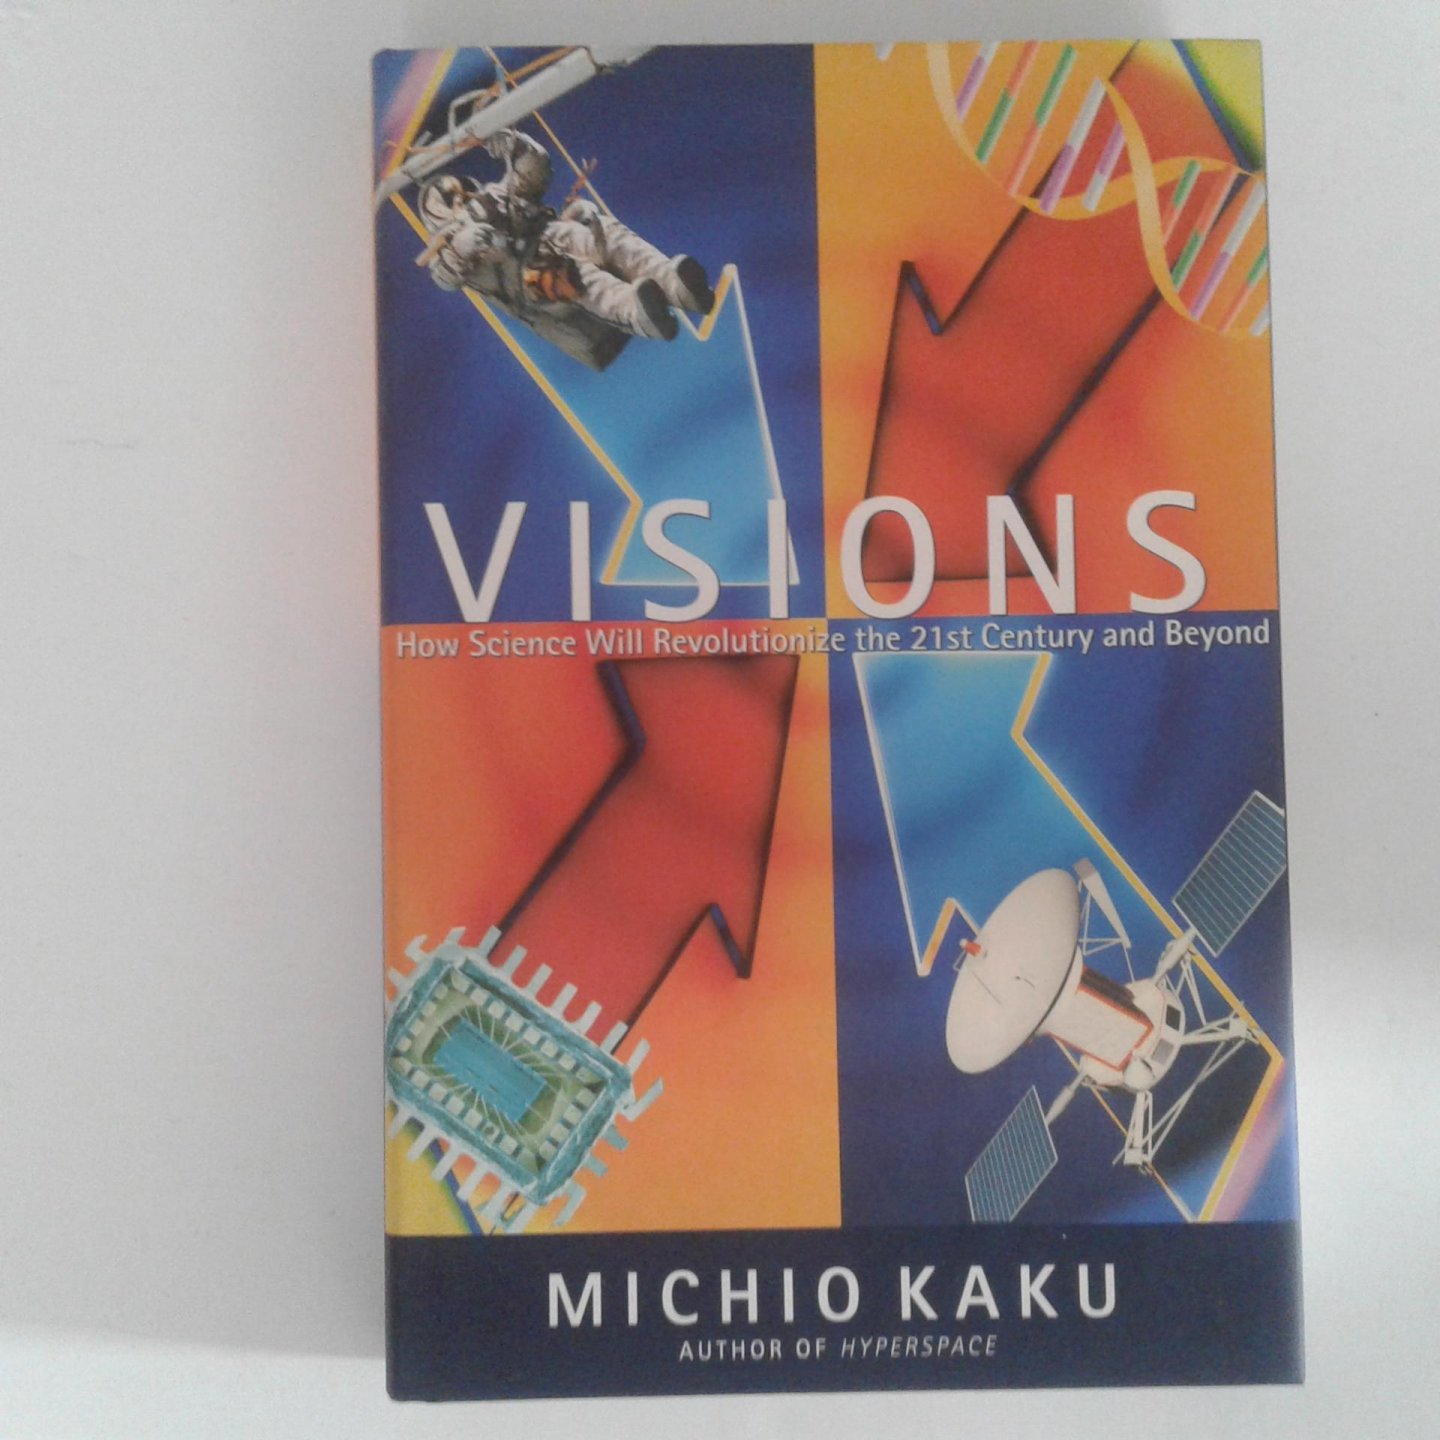 Kaku, Michio - Visions ; How Science will Revolutionize the 21st Century and Beyond